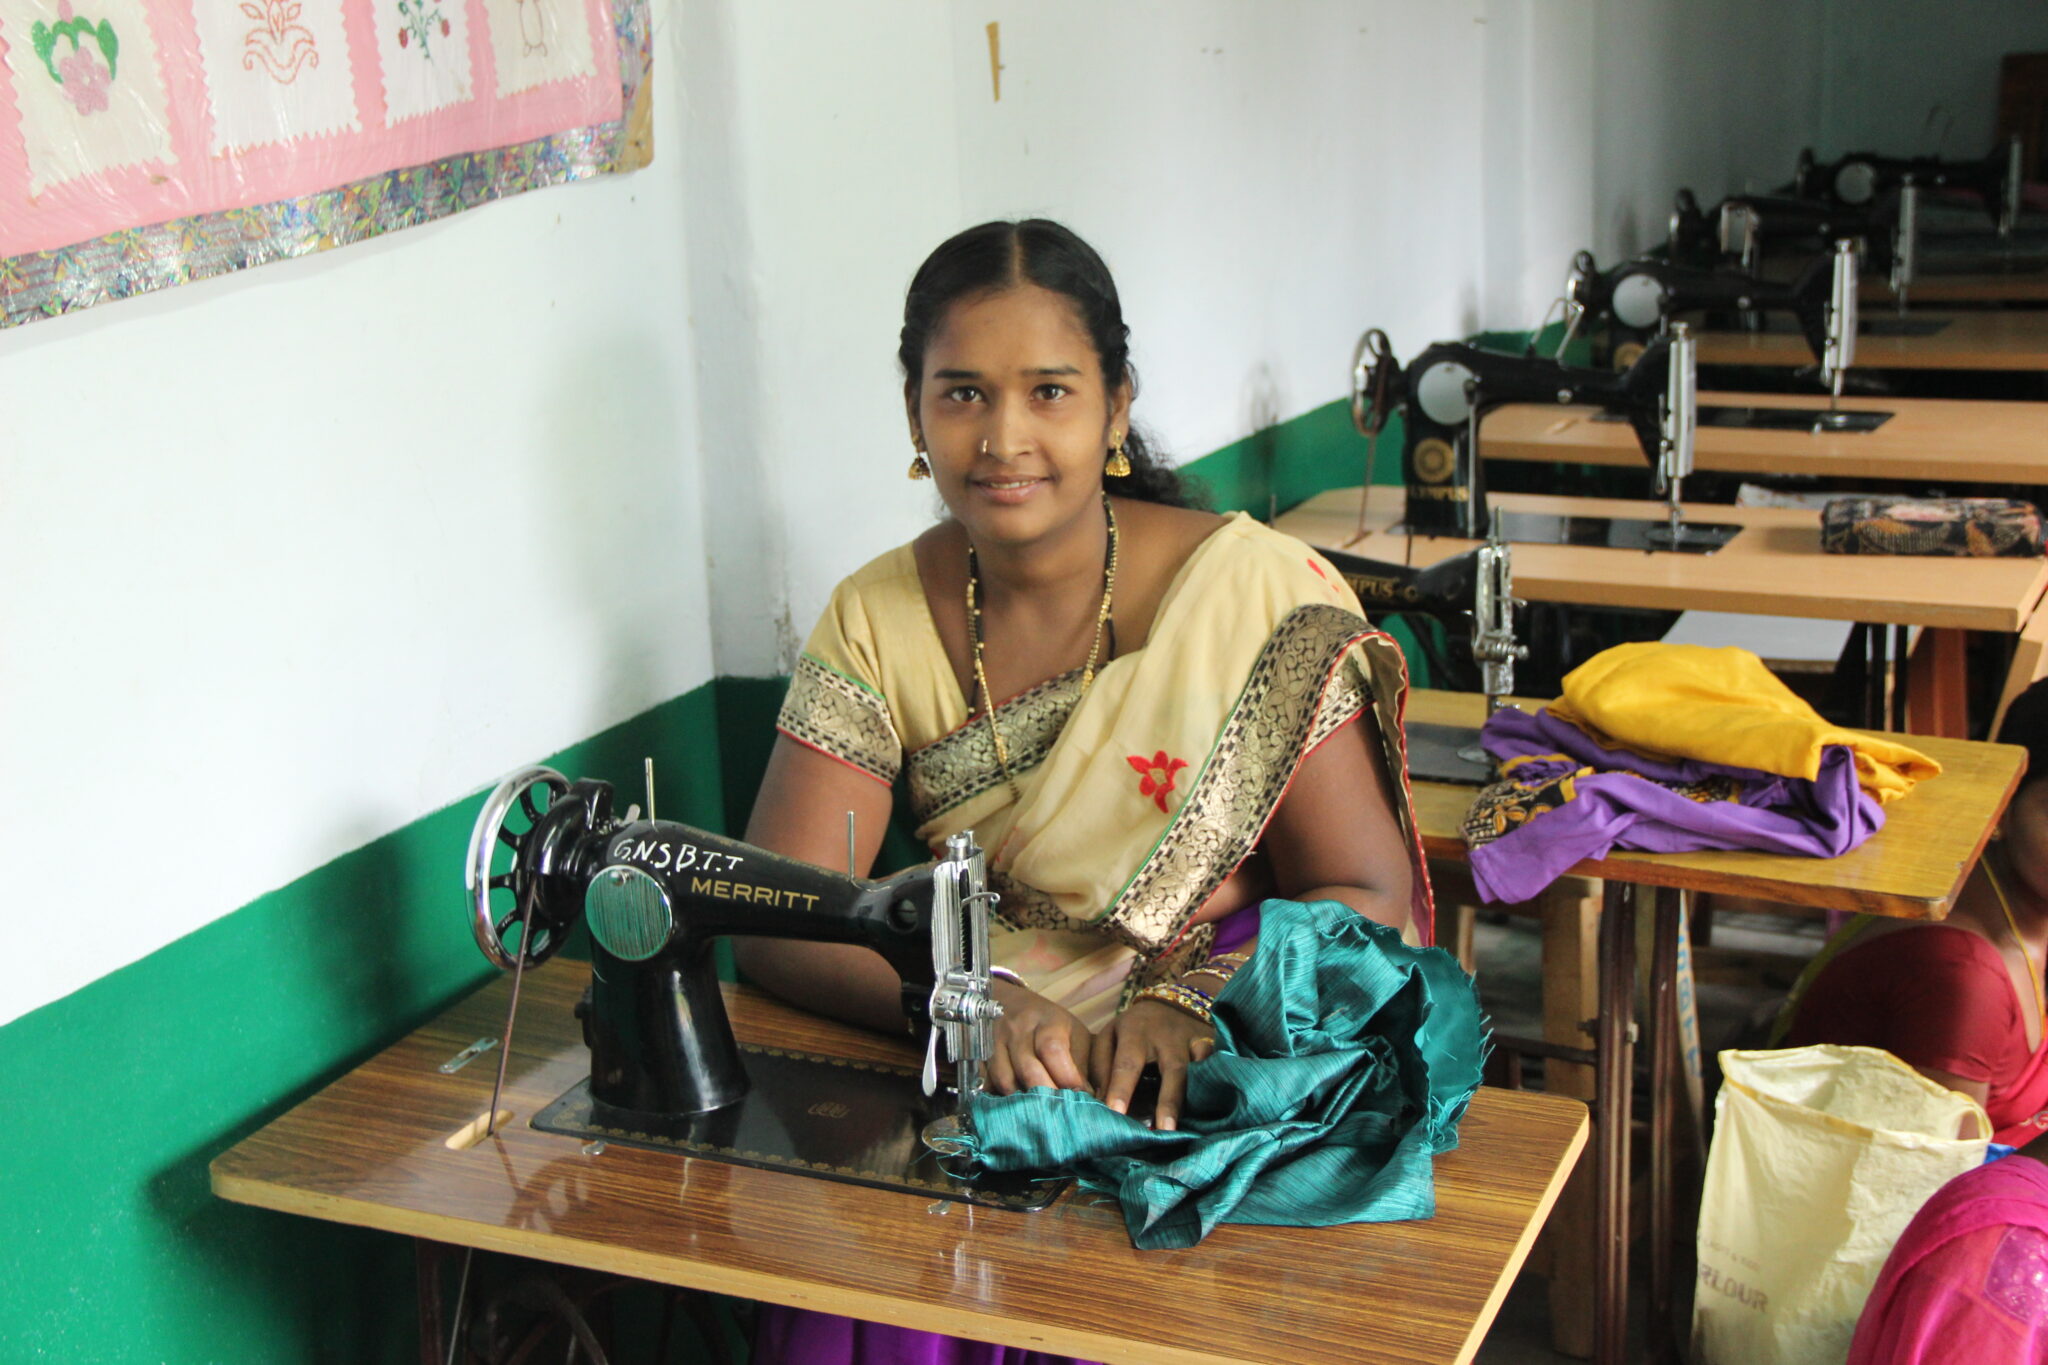 woman in India sits at table with sewing machine